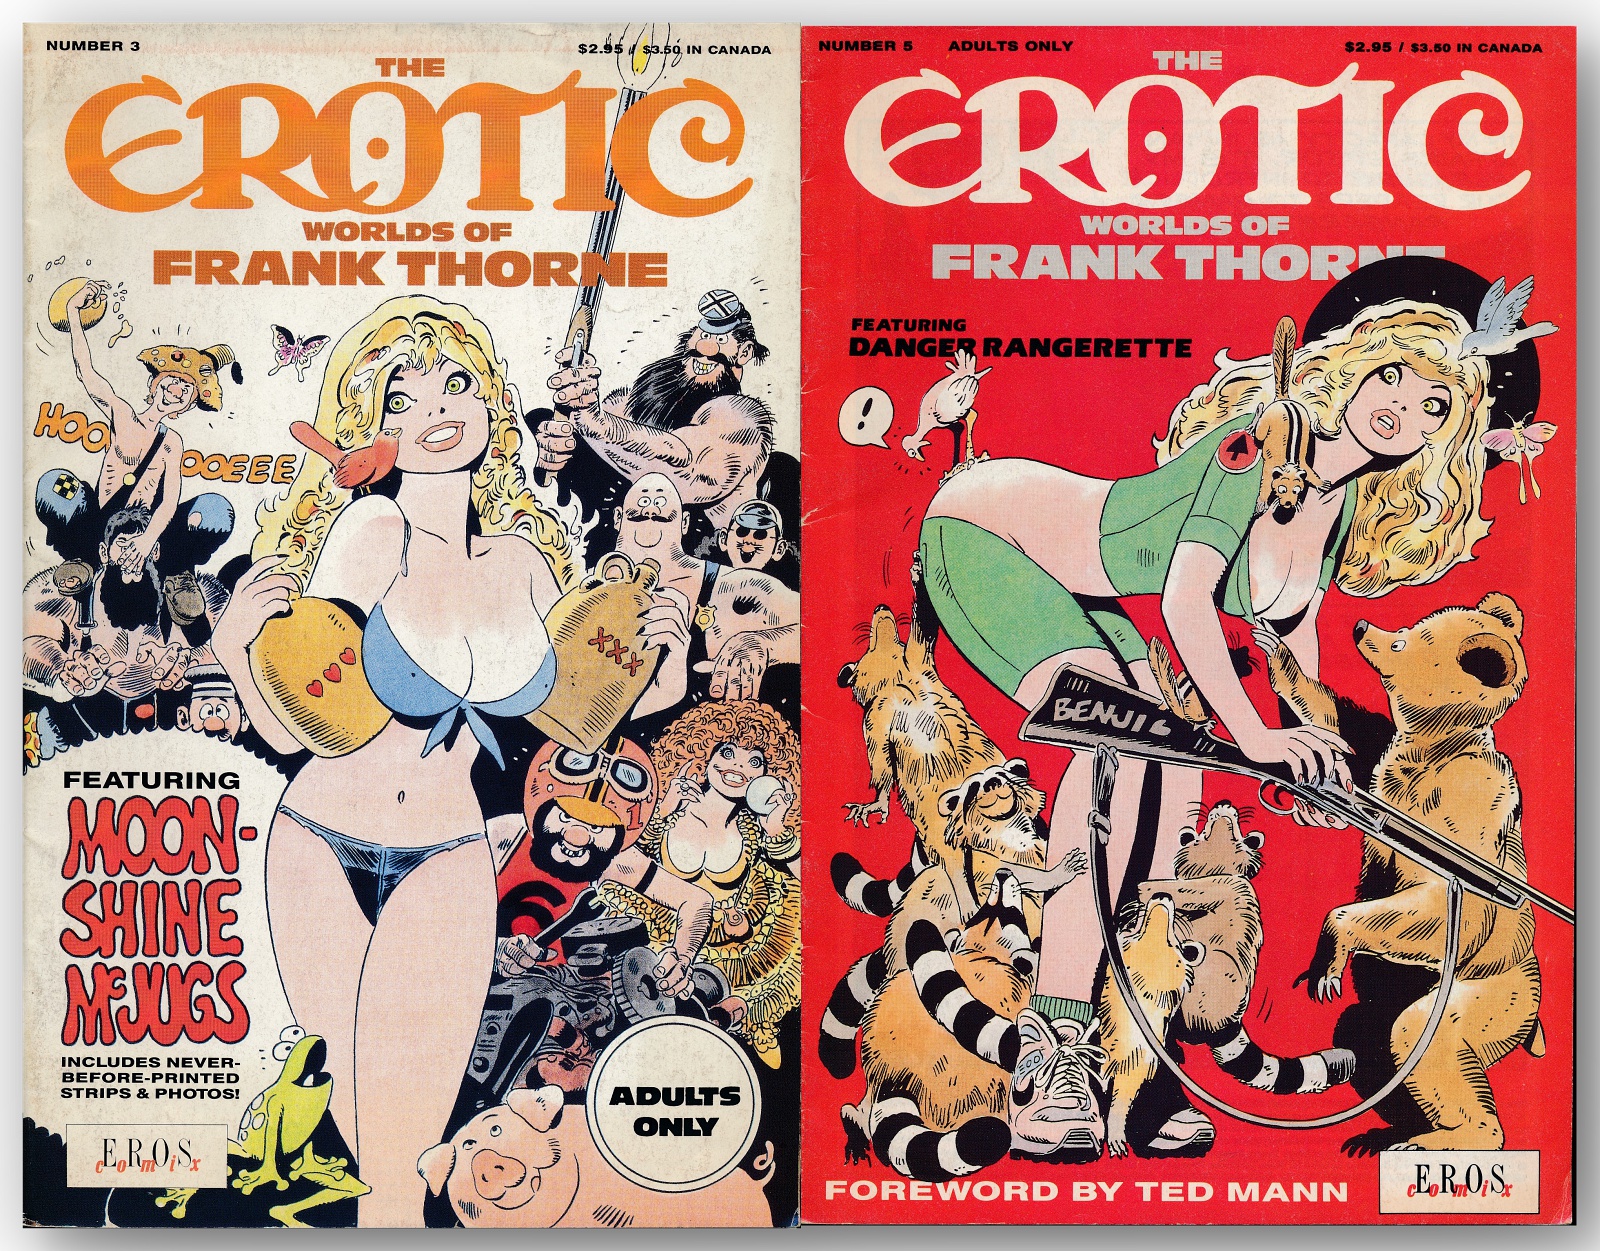 Erotic comic collection